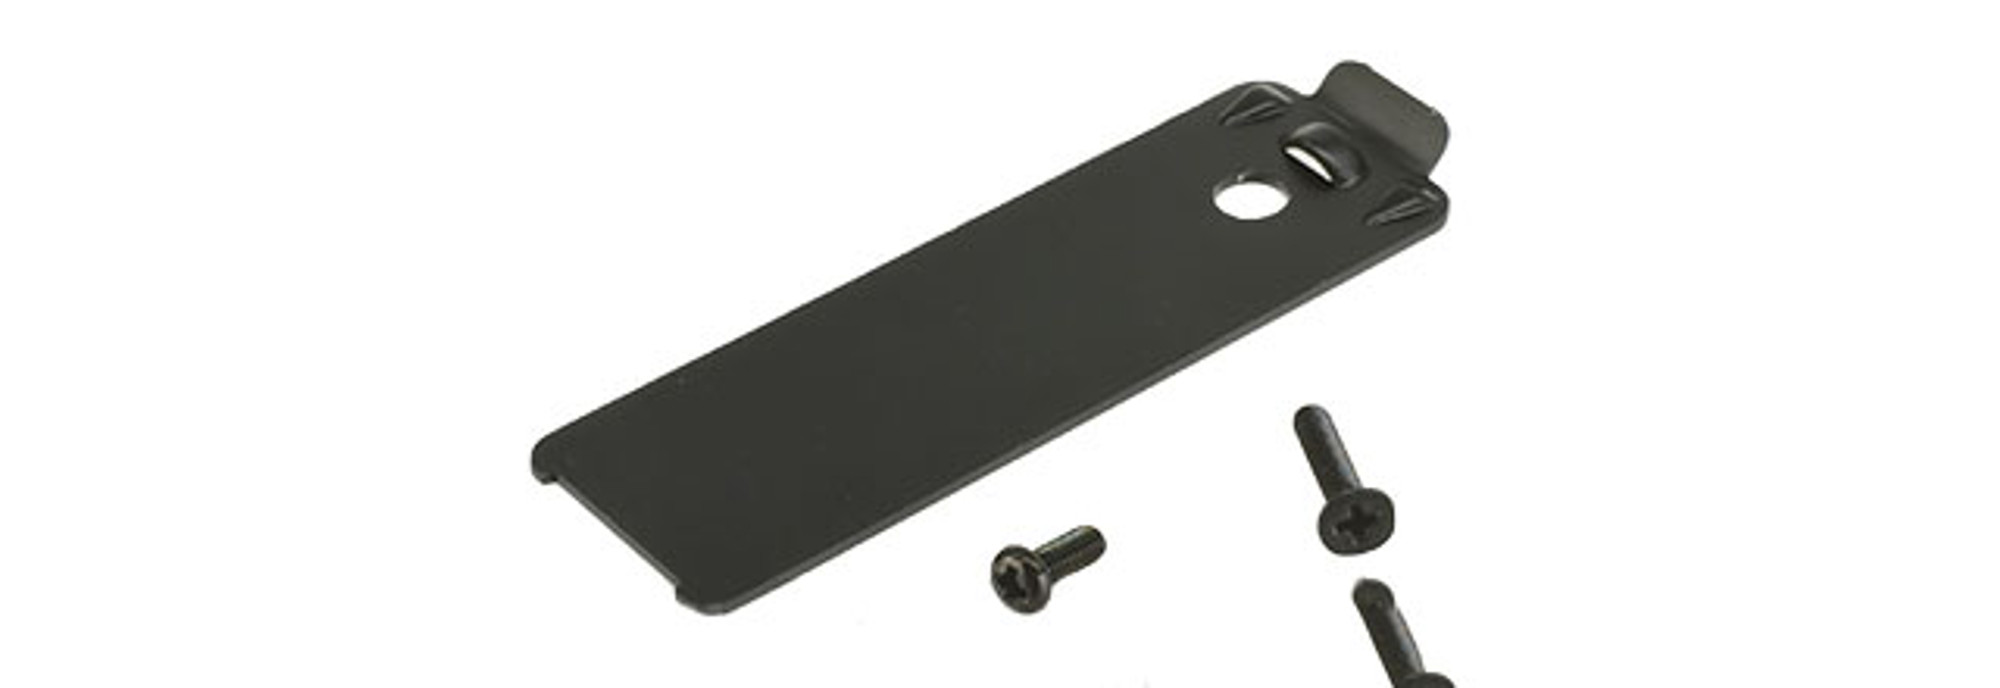 WE-Tech Replacement Magazine Baseplate for M4  M16 Series Airsoft AEG Magazines - Part# 163  174  175